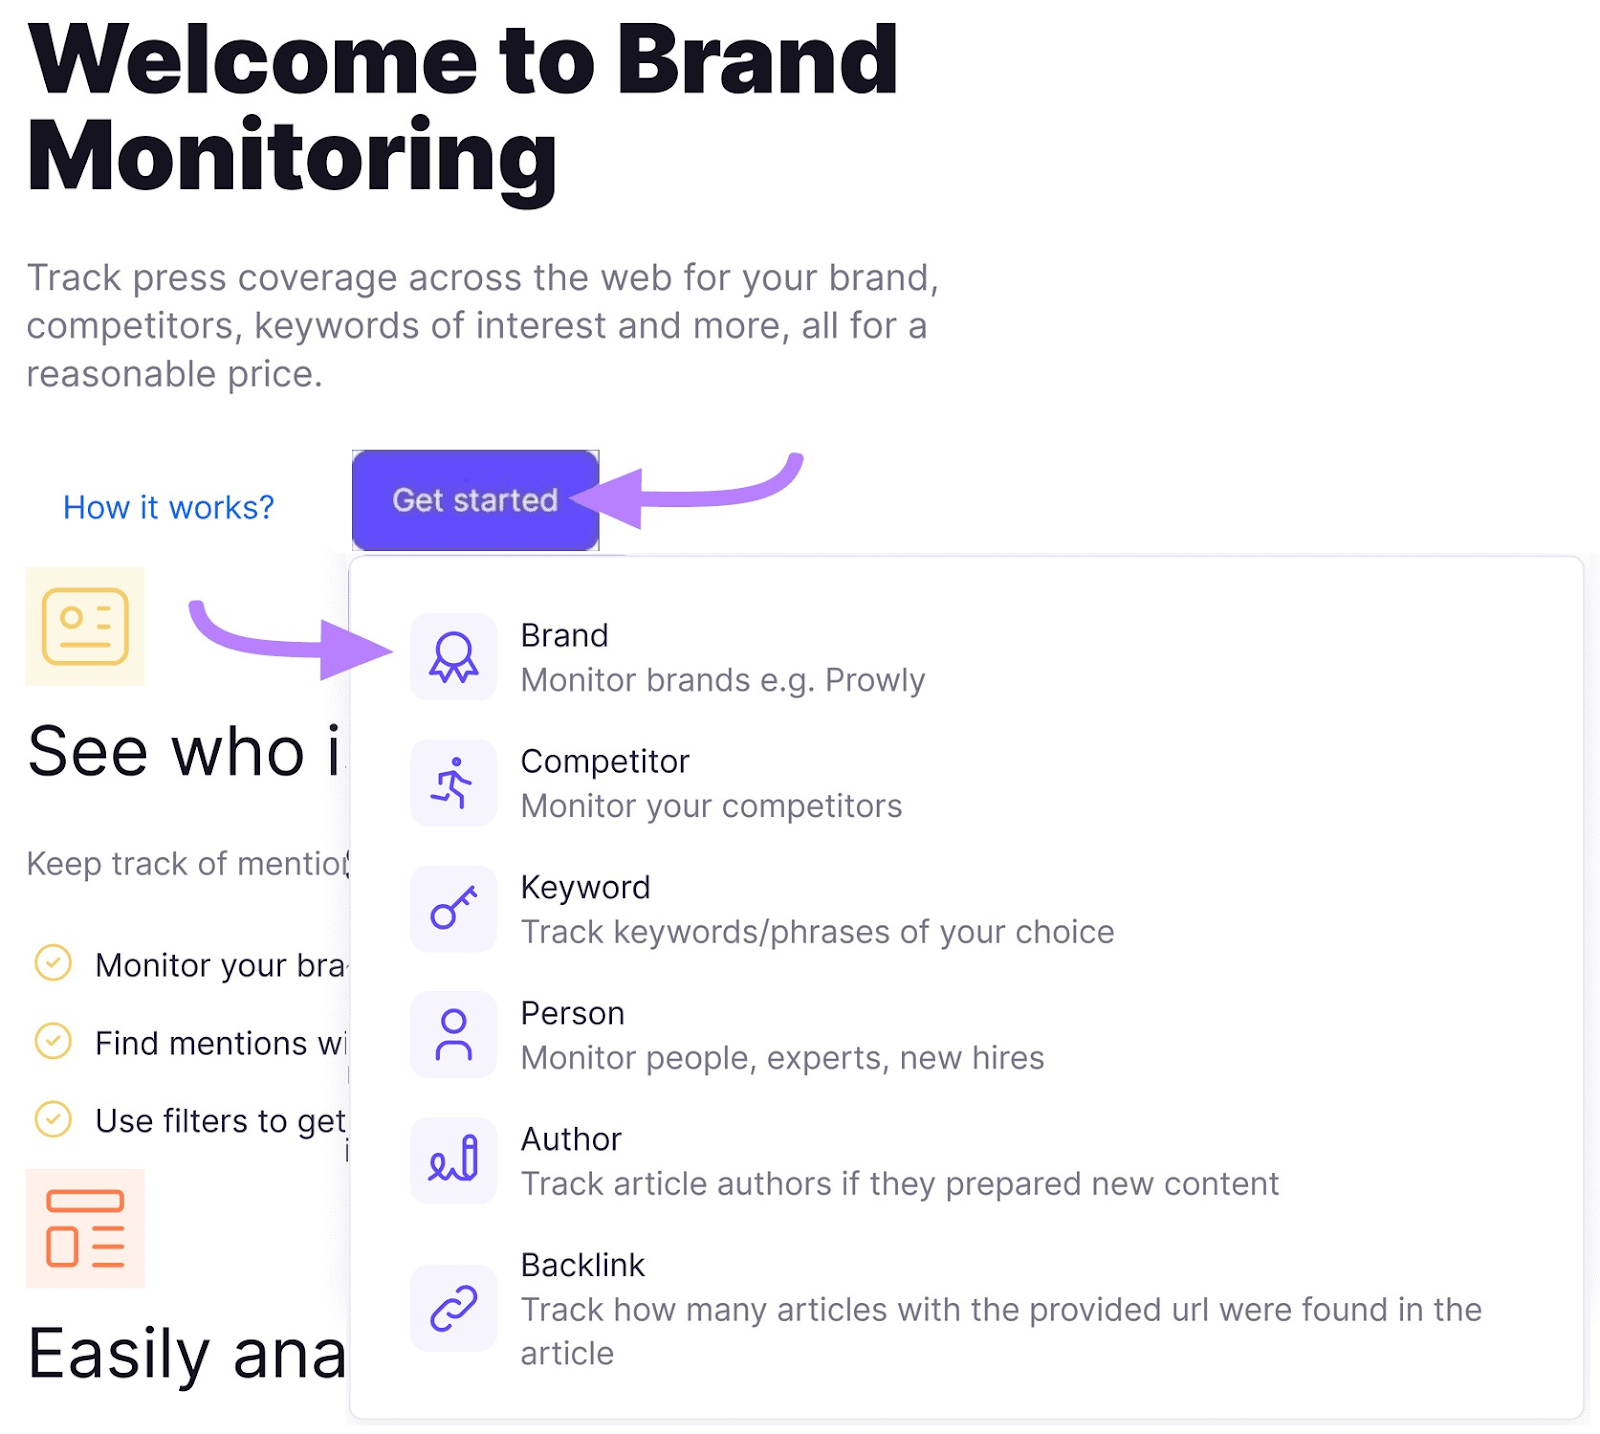 "Welcome to Brand Monitoring" page with "Get started" button drop-down menu